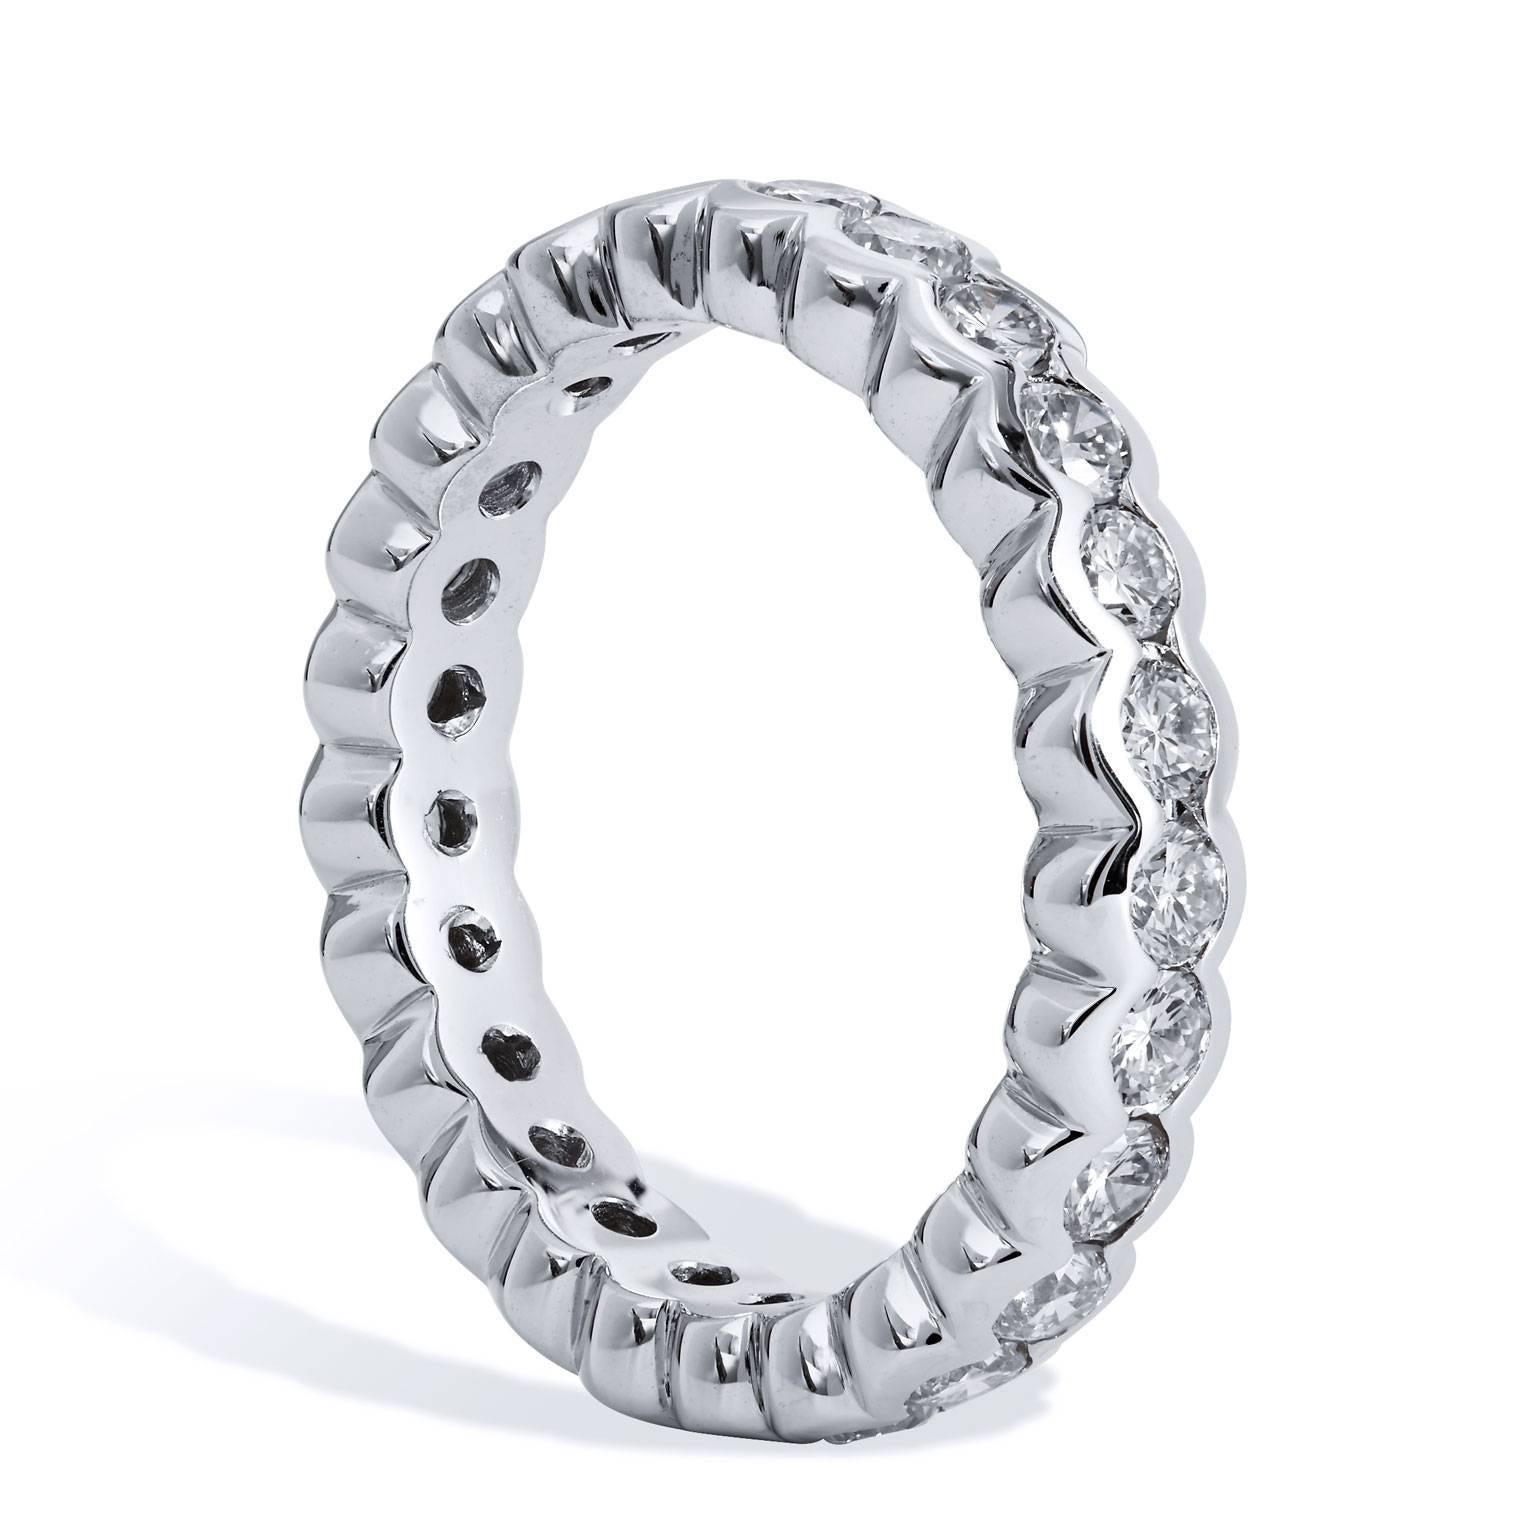 Platinum 1.65 carat Round Brilliant Cut Diamond Eternity Band Ring Size 6

Enjoy this previously loved platinum band ring featuring twenty-five round brilliant cut diamonds in channel setting.  
These 1.65 carat of diamonds pop with brilliant color